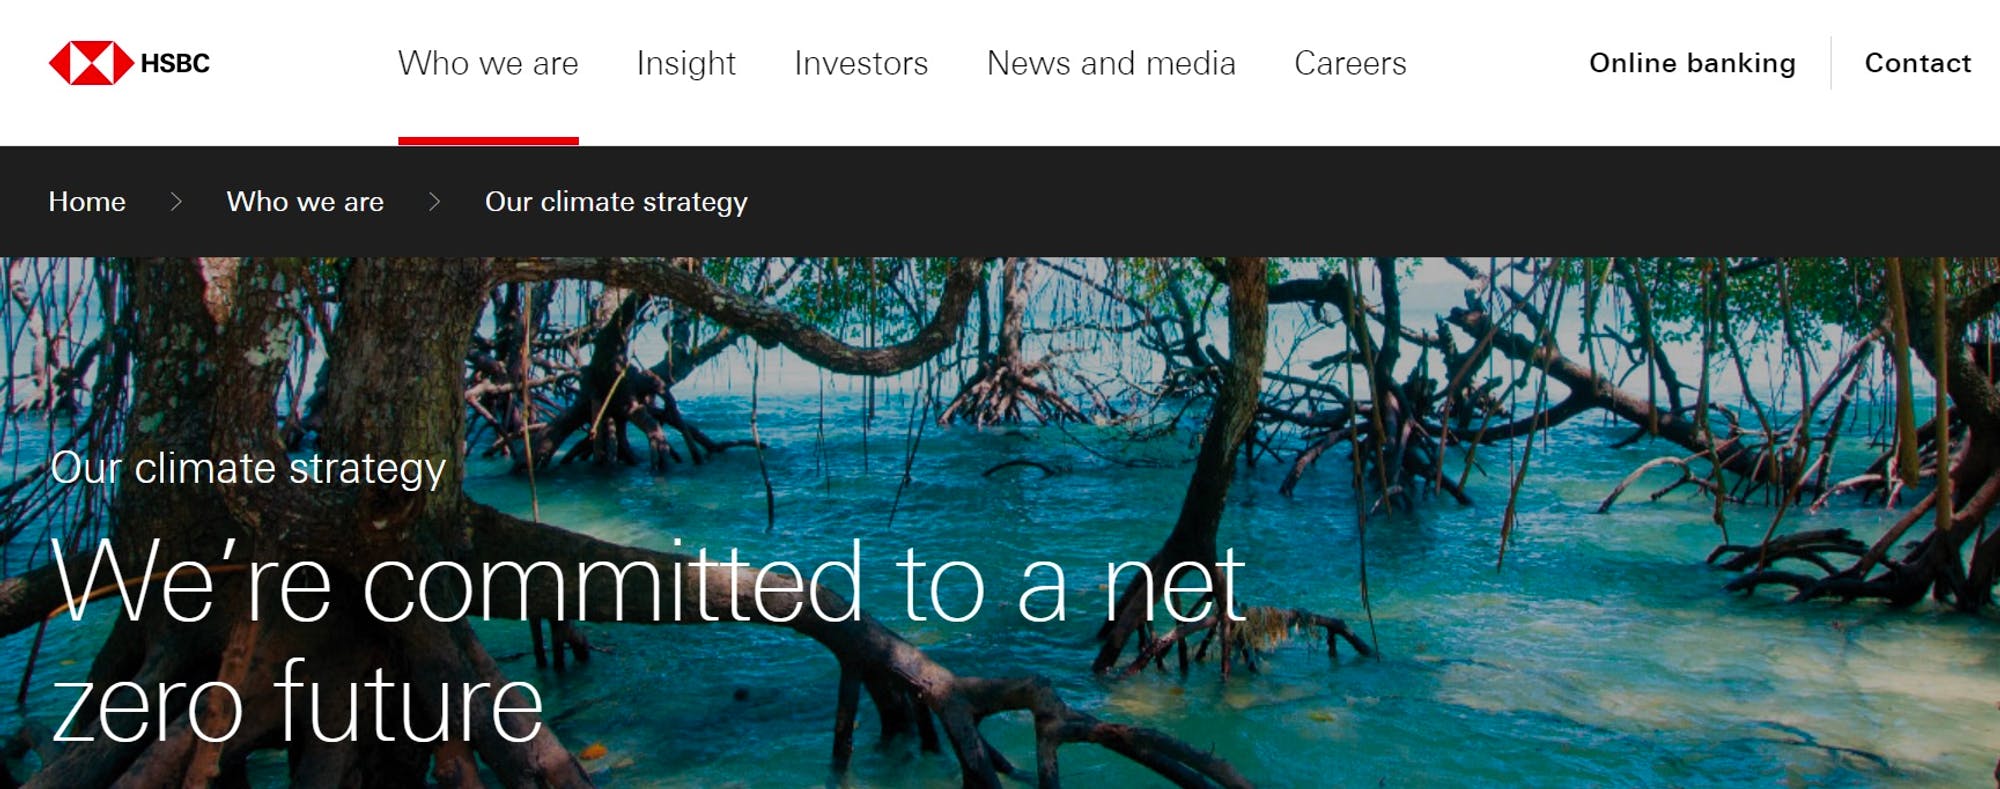 Screenshot of HSBC Website reading "We're committed to a net zero future"